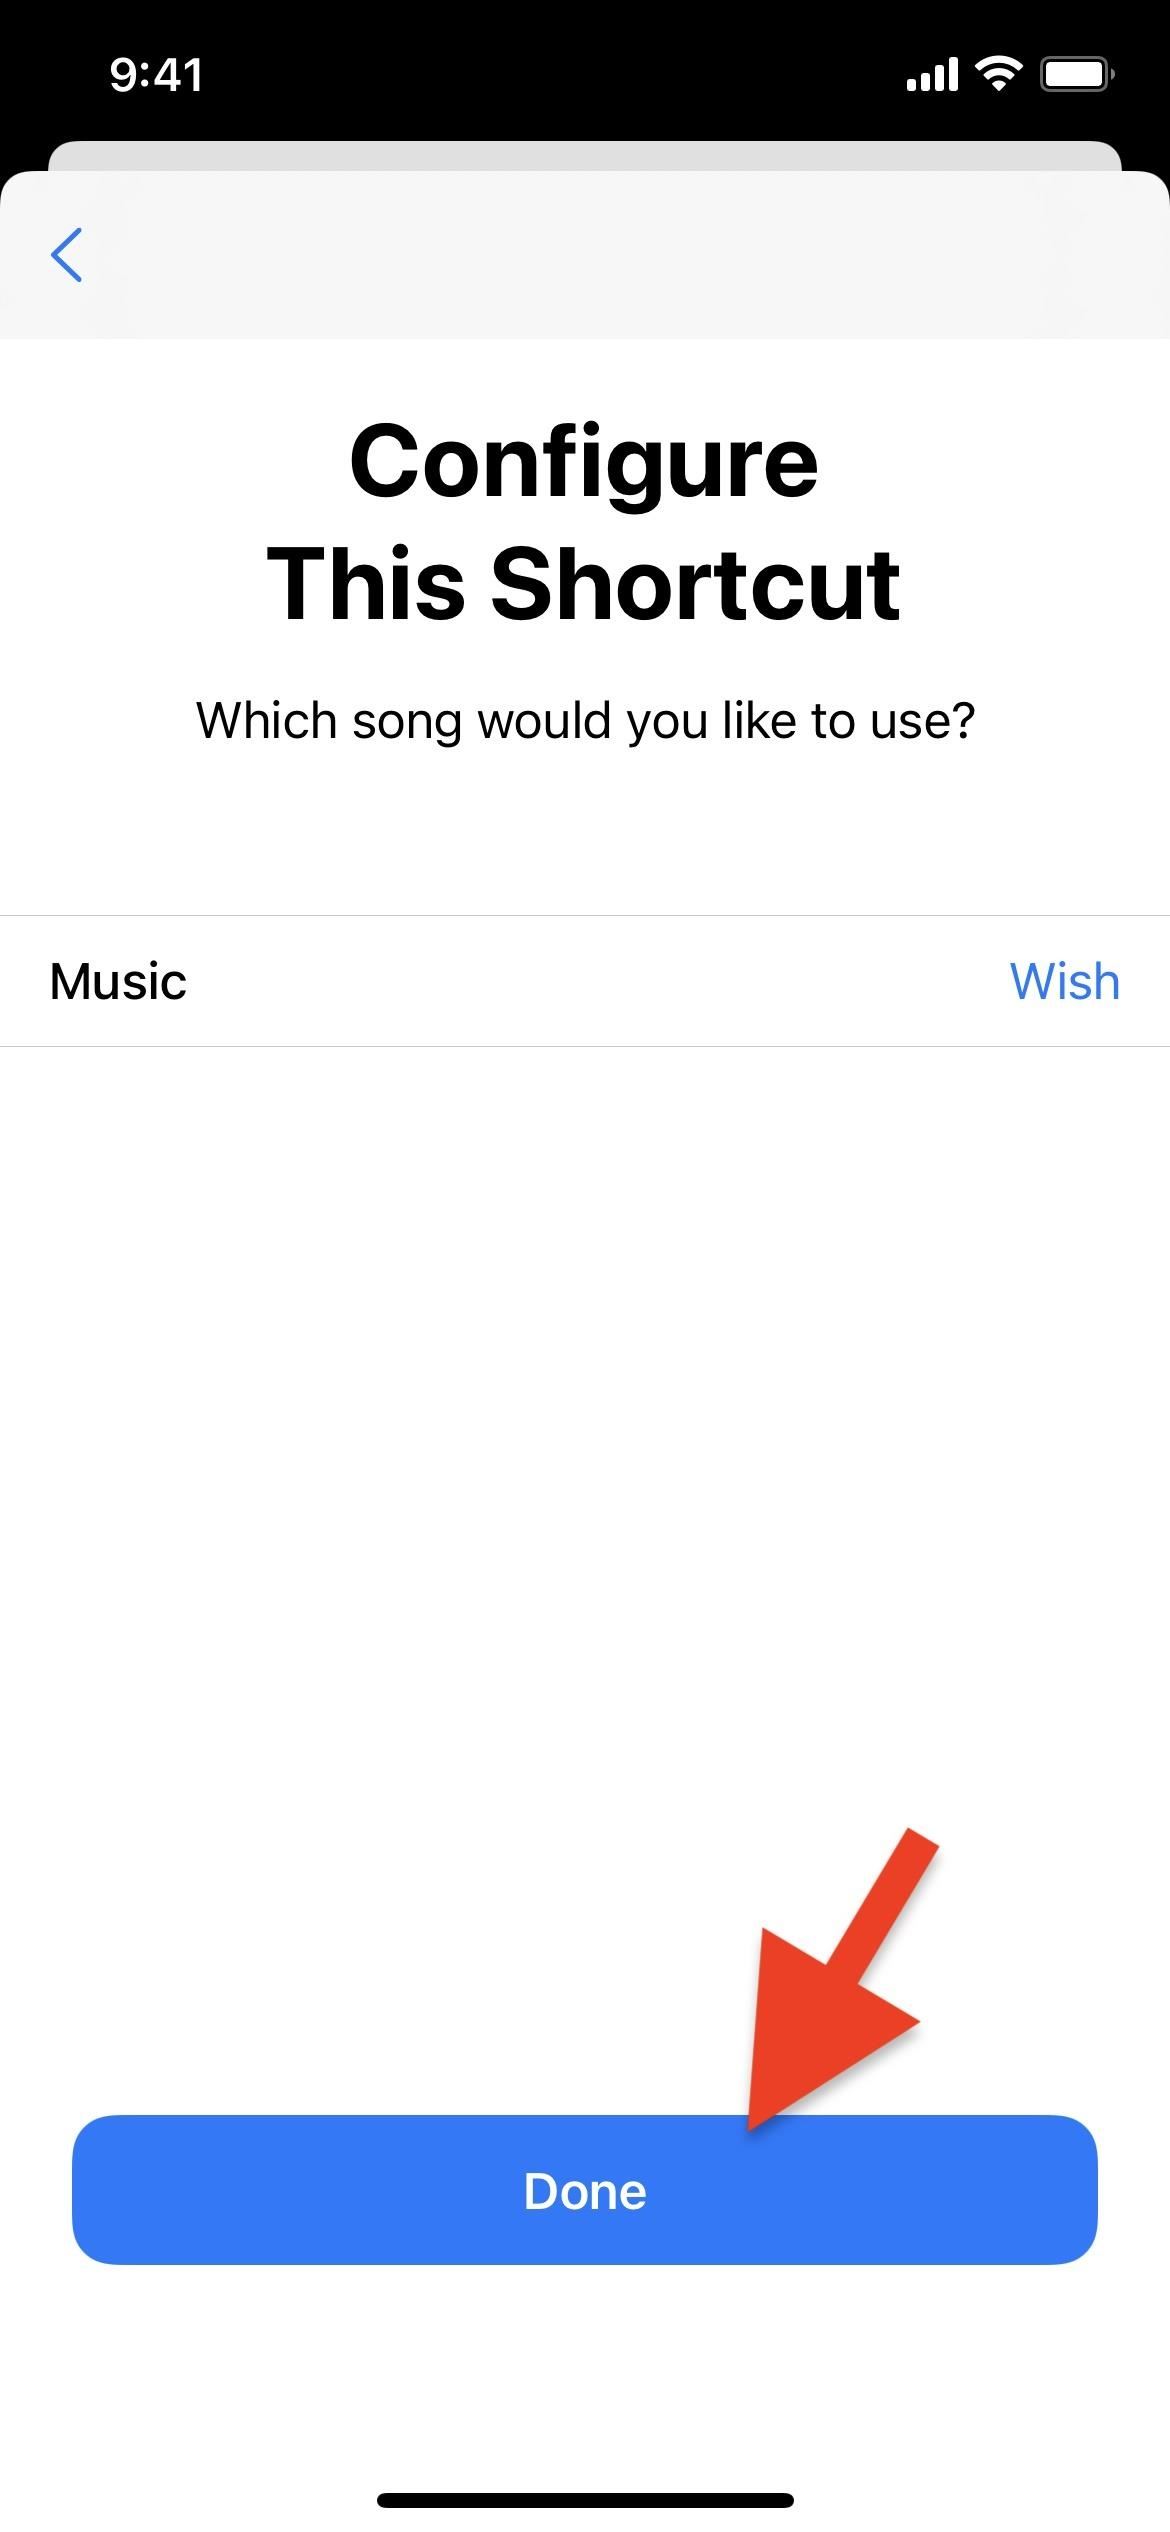 Use Any Song on Your iPhone as a Gradually Increasing Alarm for a Gentle Wakeup